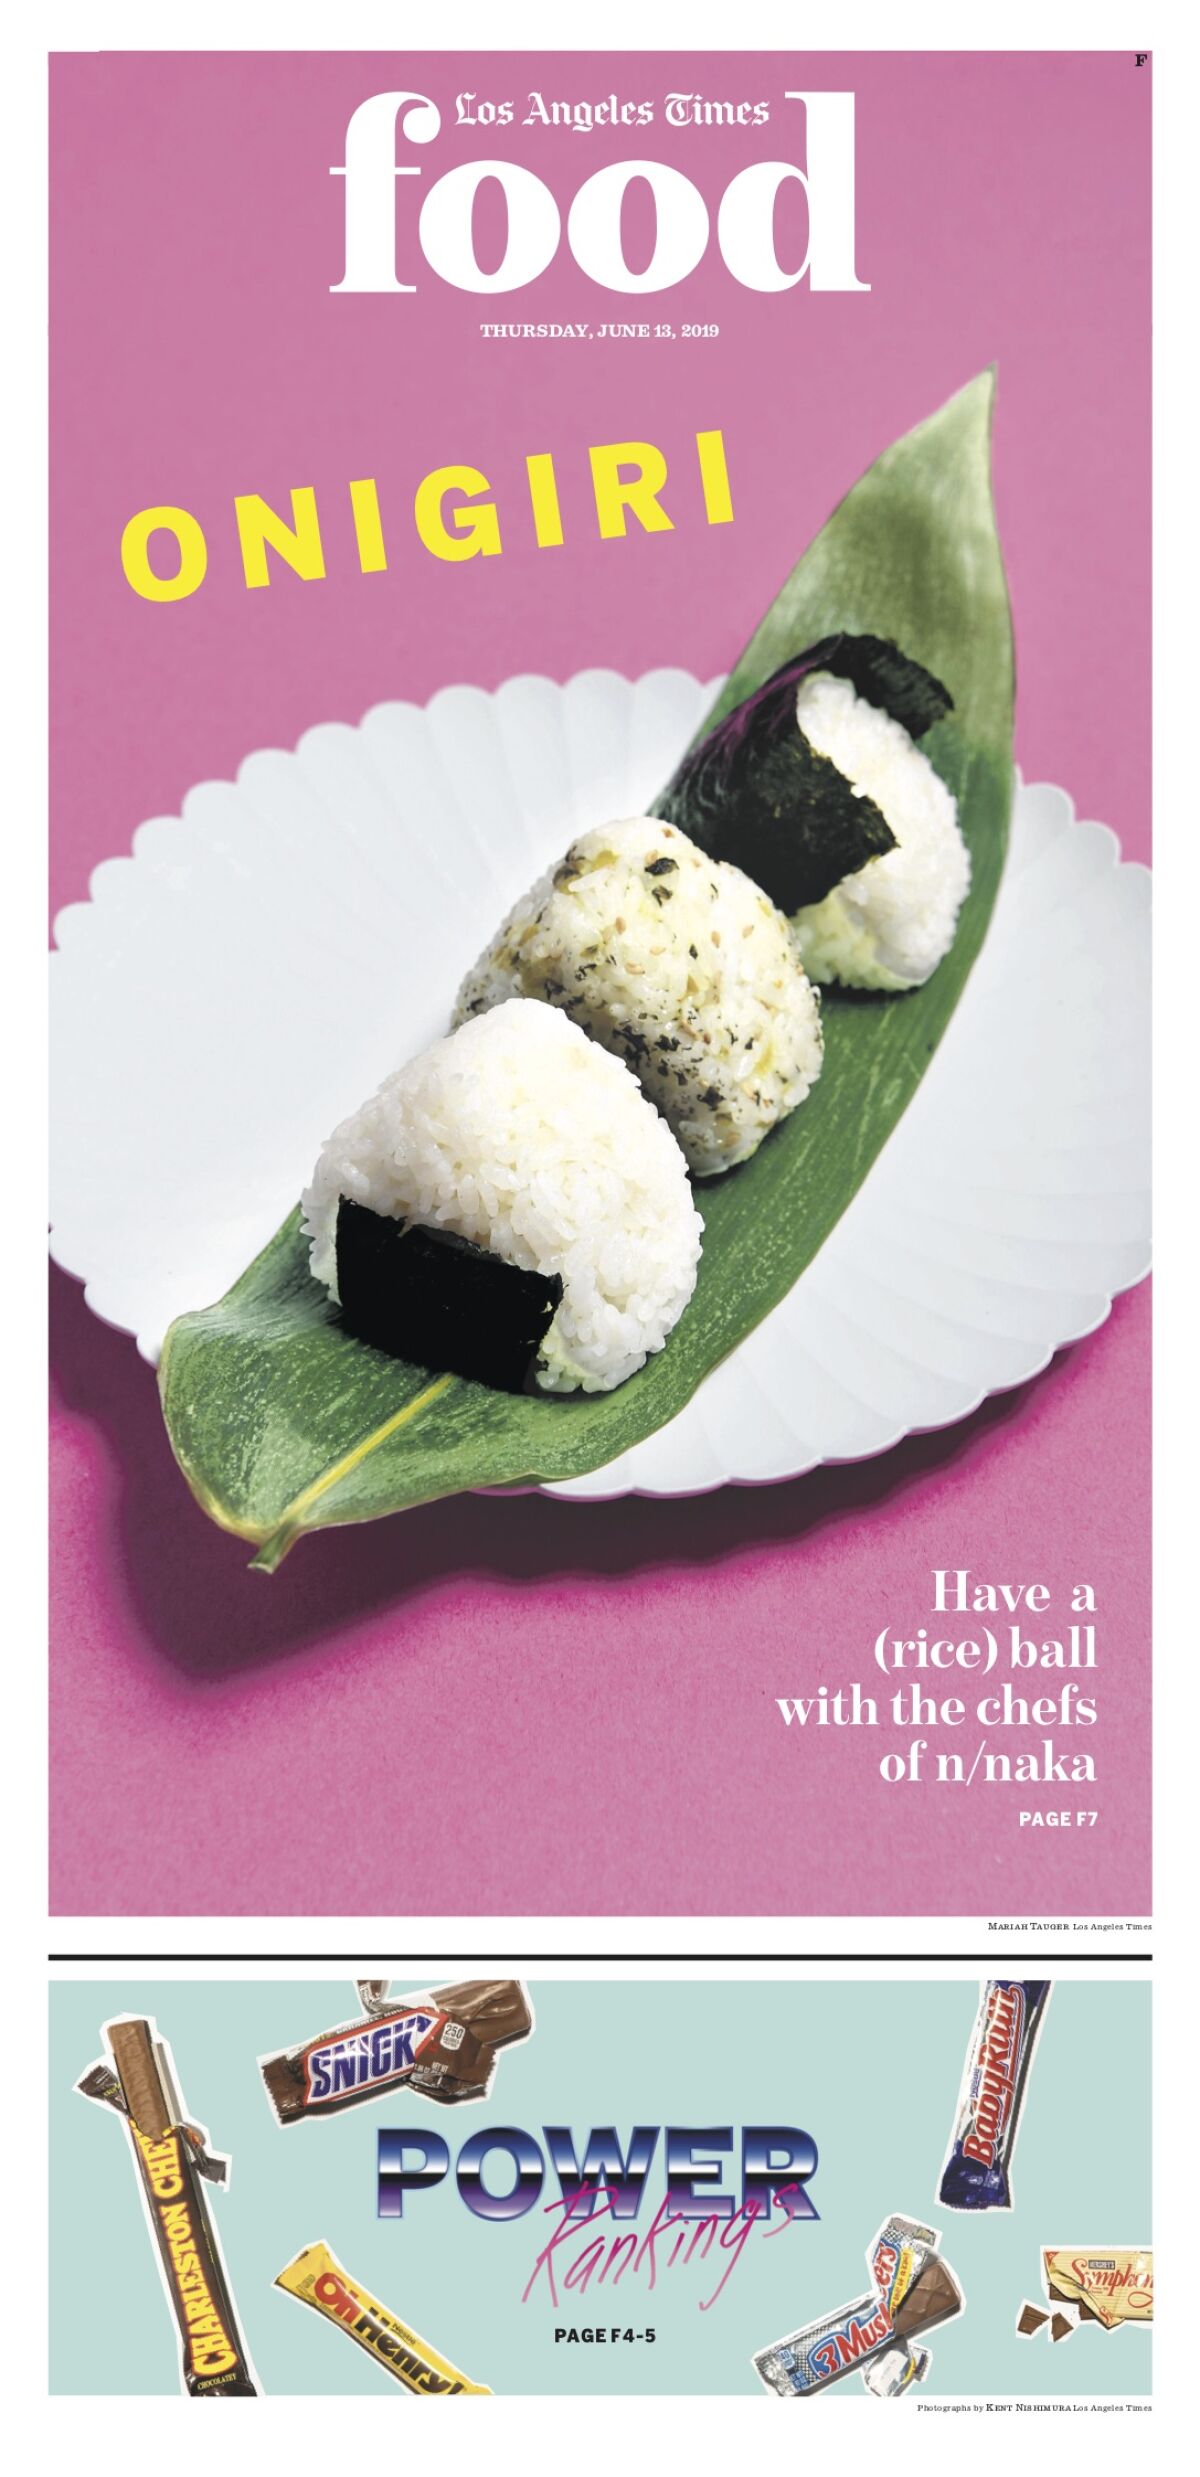 Los Angeles Times Food cover, June 13, 2019